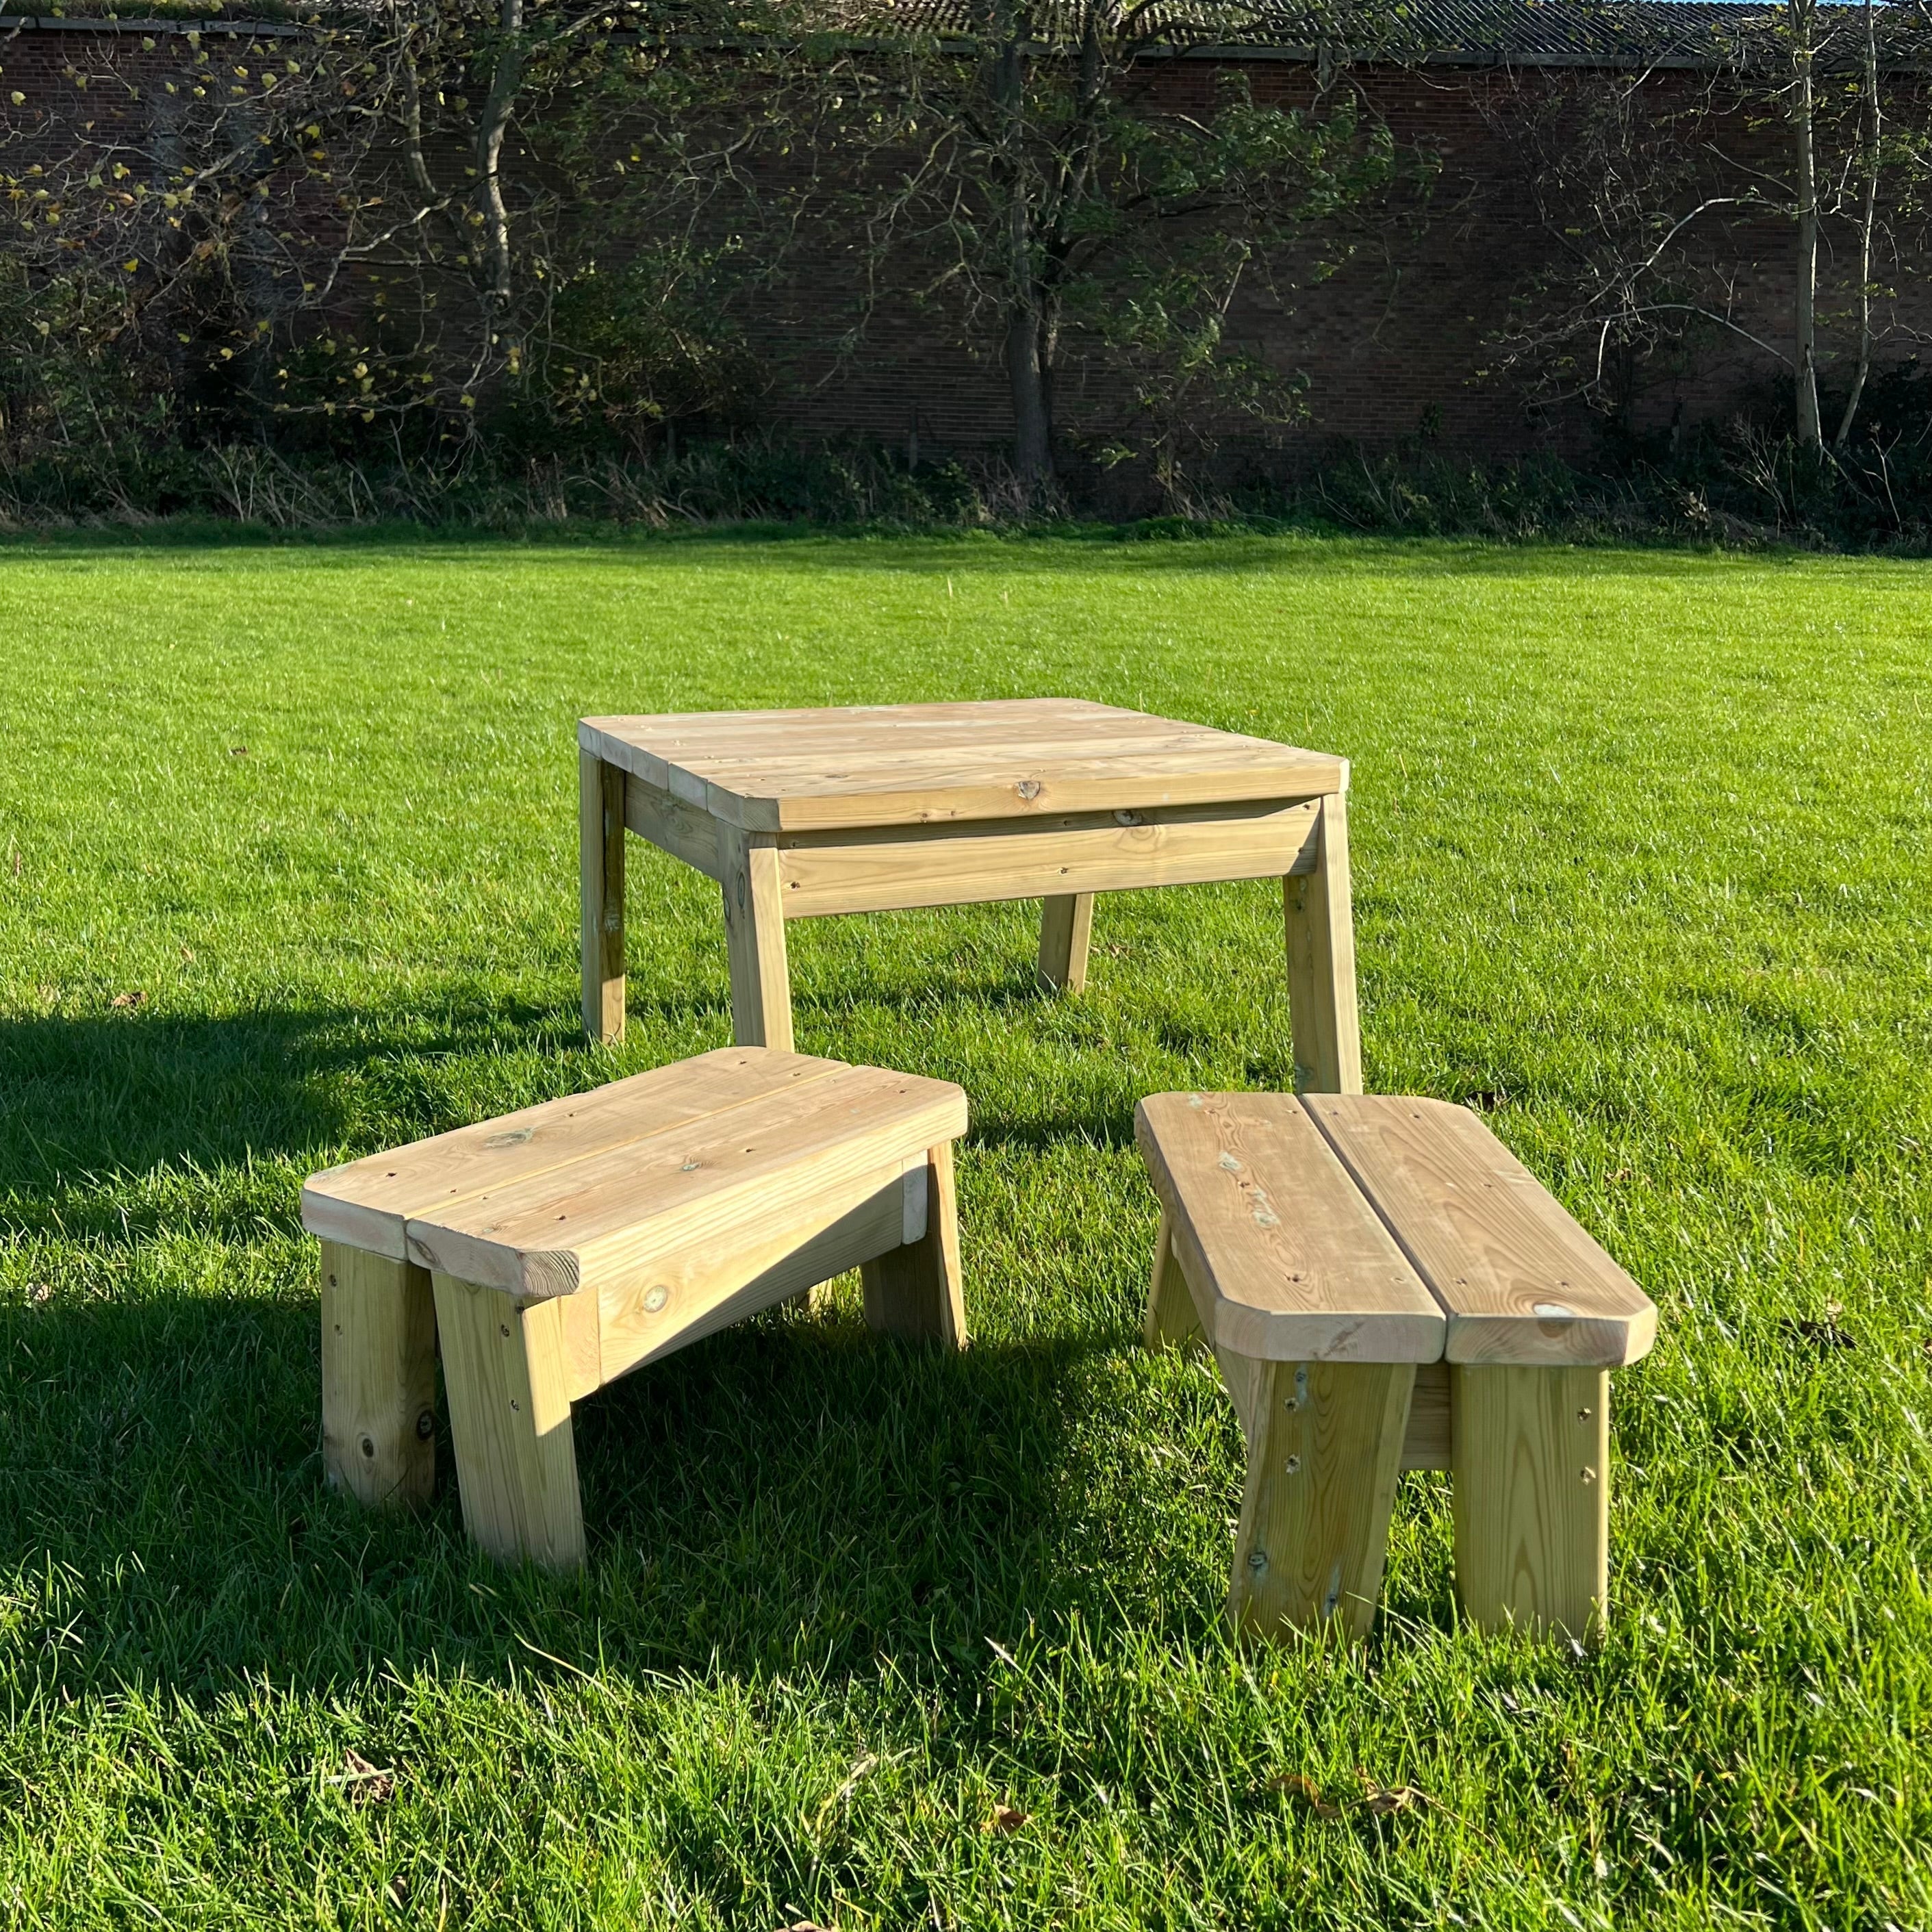 Children's Outdoor Mini Table and Benches, Every early years, educational environment needs outdoor seating! The Children's Outdoor Mini Table and Benches are suitable to accommodate at least 2 children at once. It is the perfect seating set to enjoy lunchtime outdoors.Robust and built in a square shape, this resource can be used in multiple outdoor lessons. The Children's Outdoor Mini Table and Benches is made from sustainable FSC Pressure Treated Redwood Timber. Delivery 4-6 weeks Delivered fully Assemble